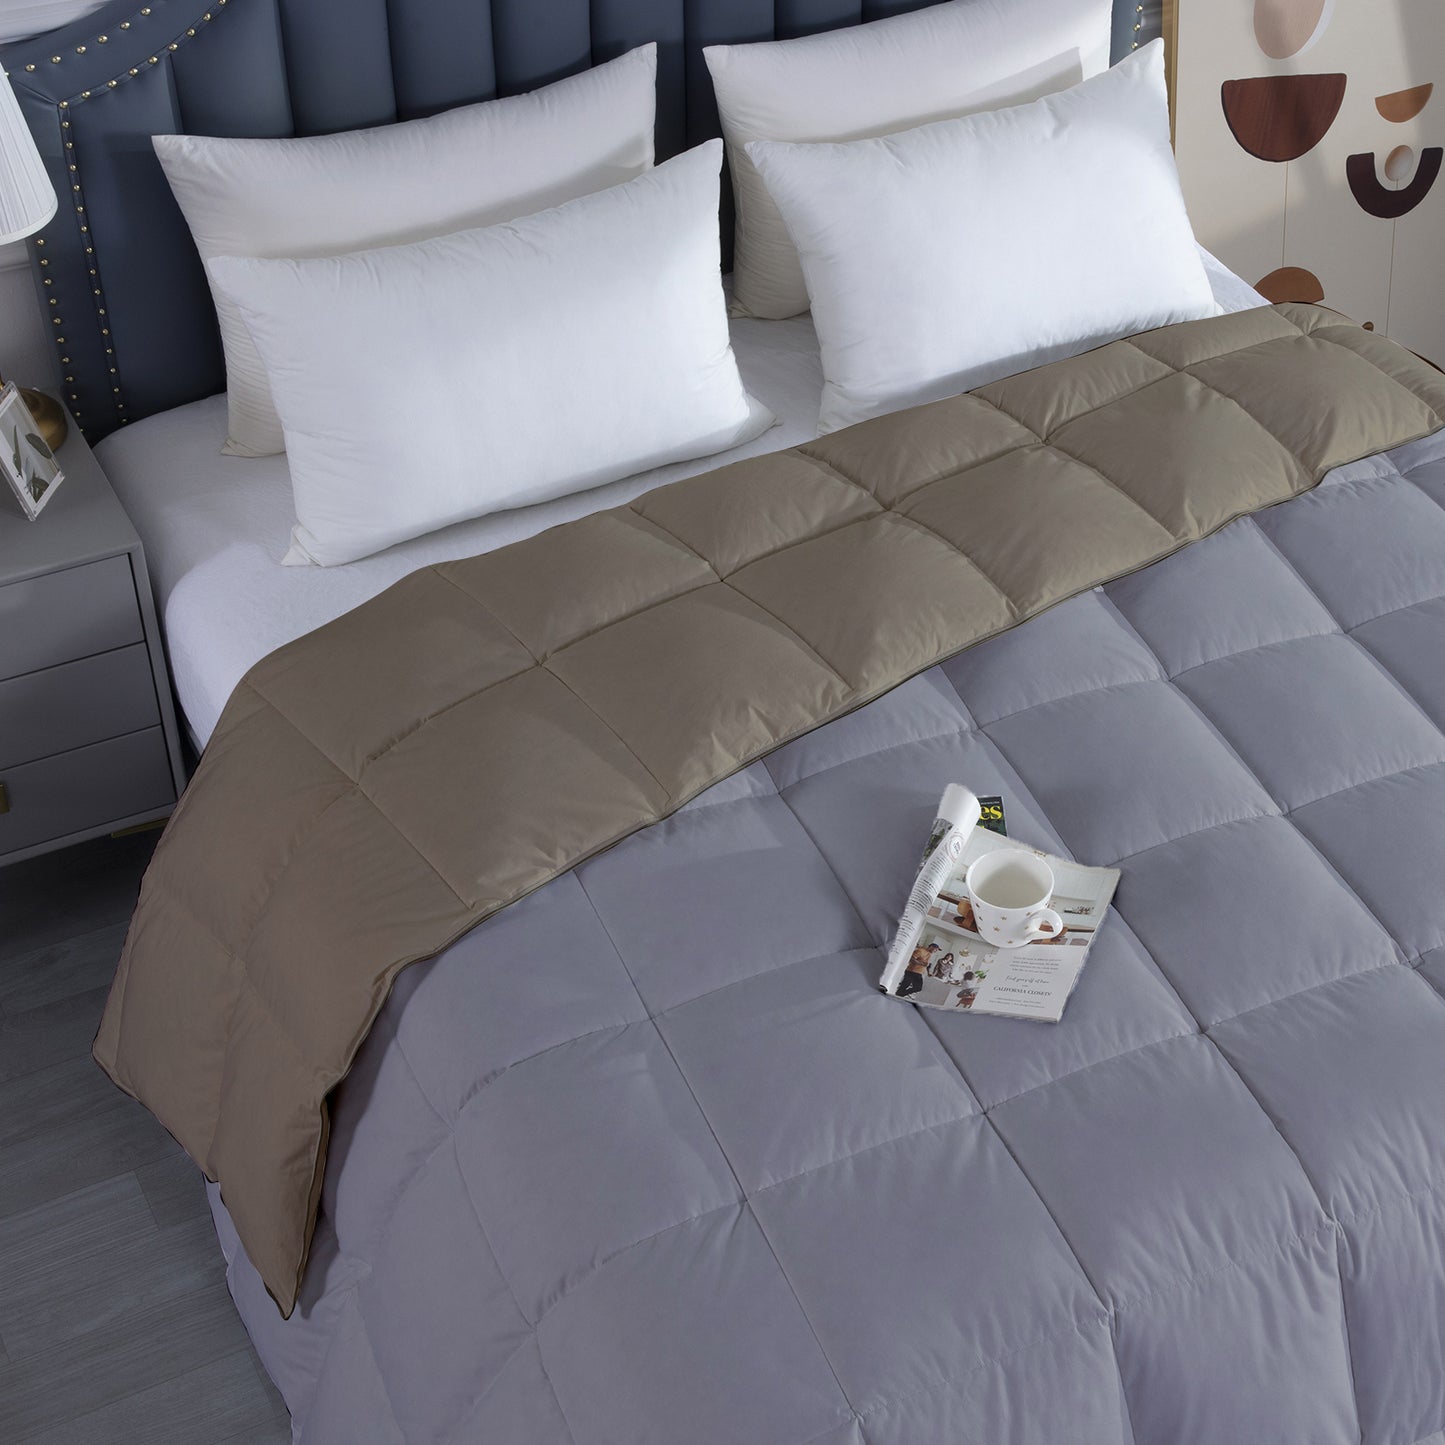 Razzai Down Alternative Soft Quilted 300 GSM All Weather Comforter |Silver/Beige